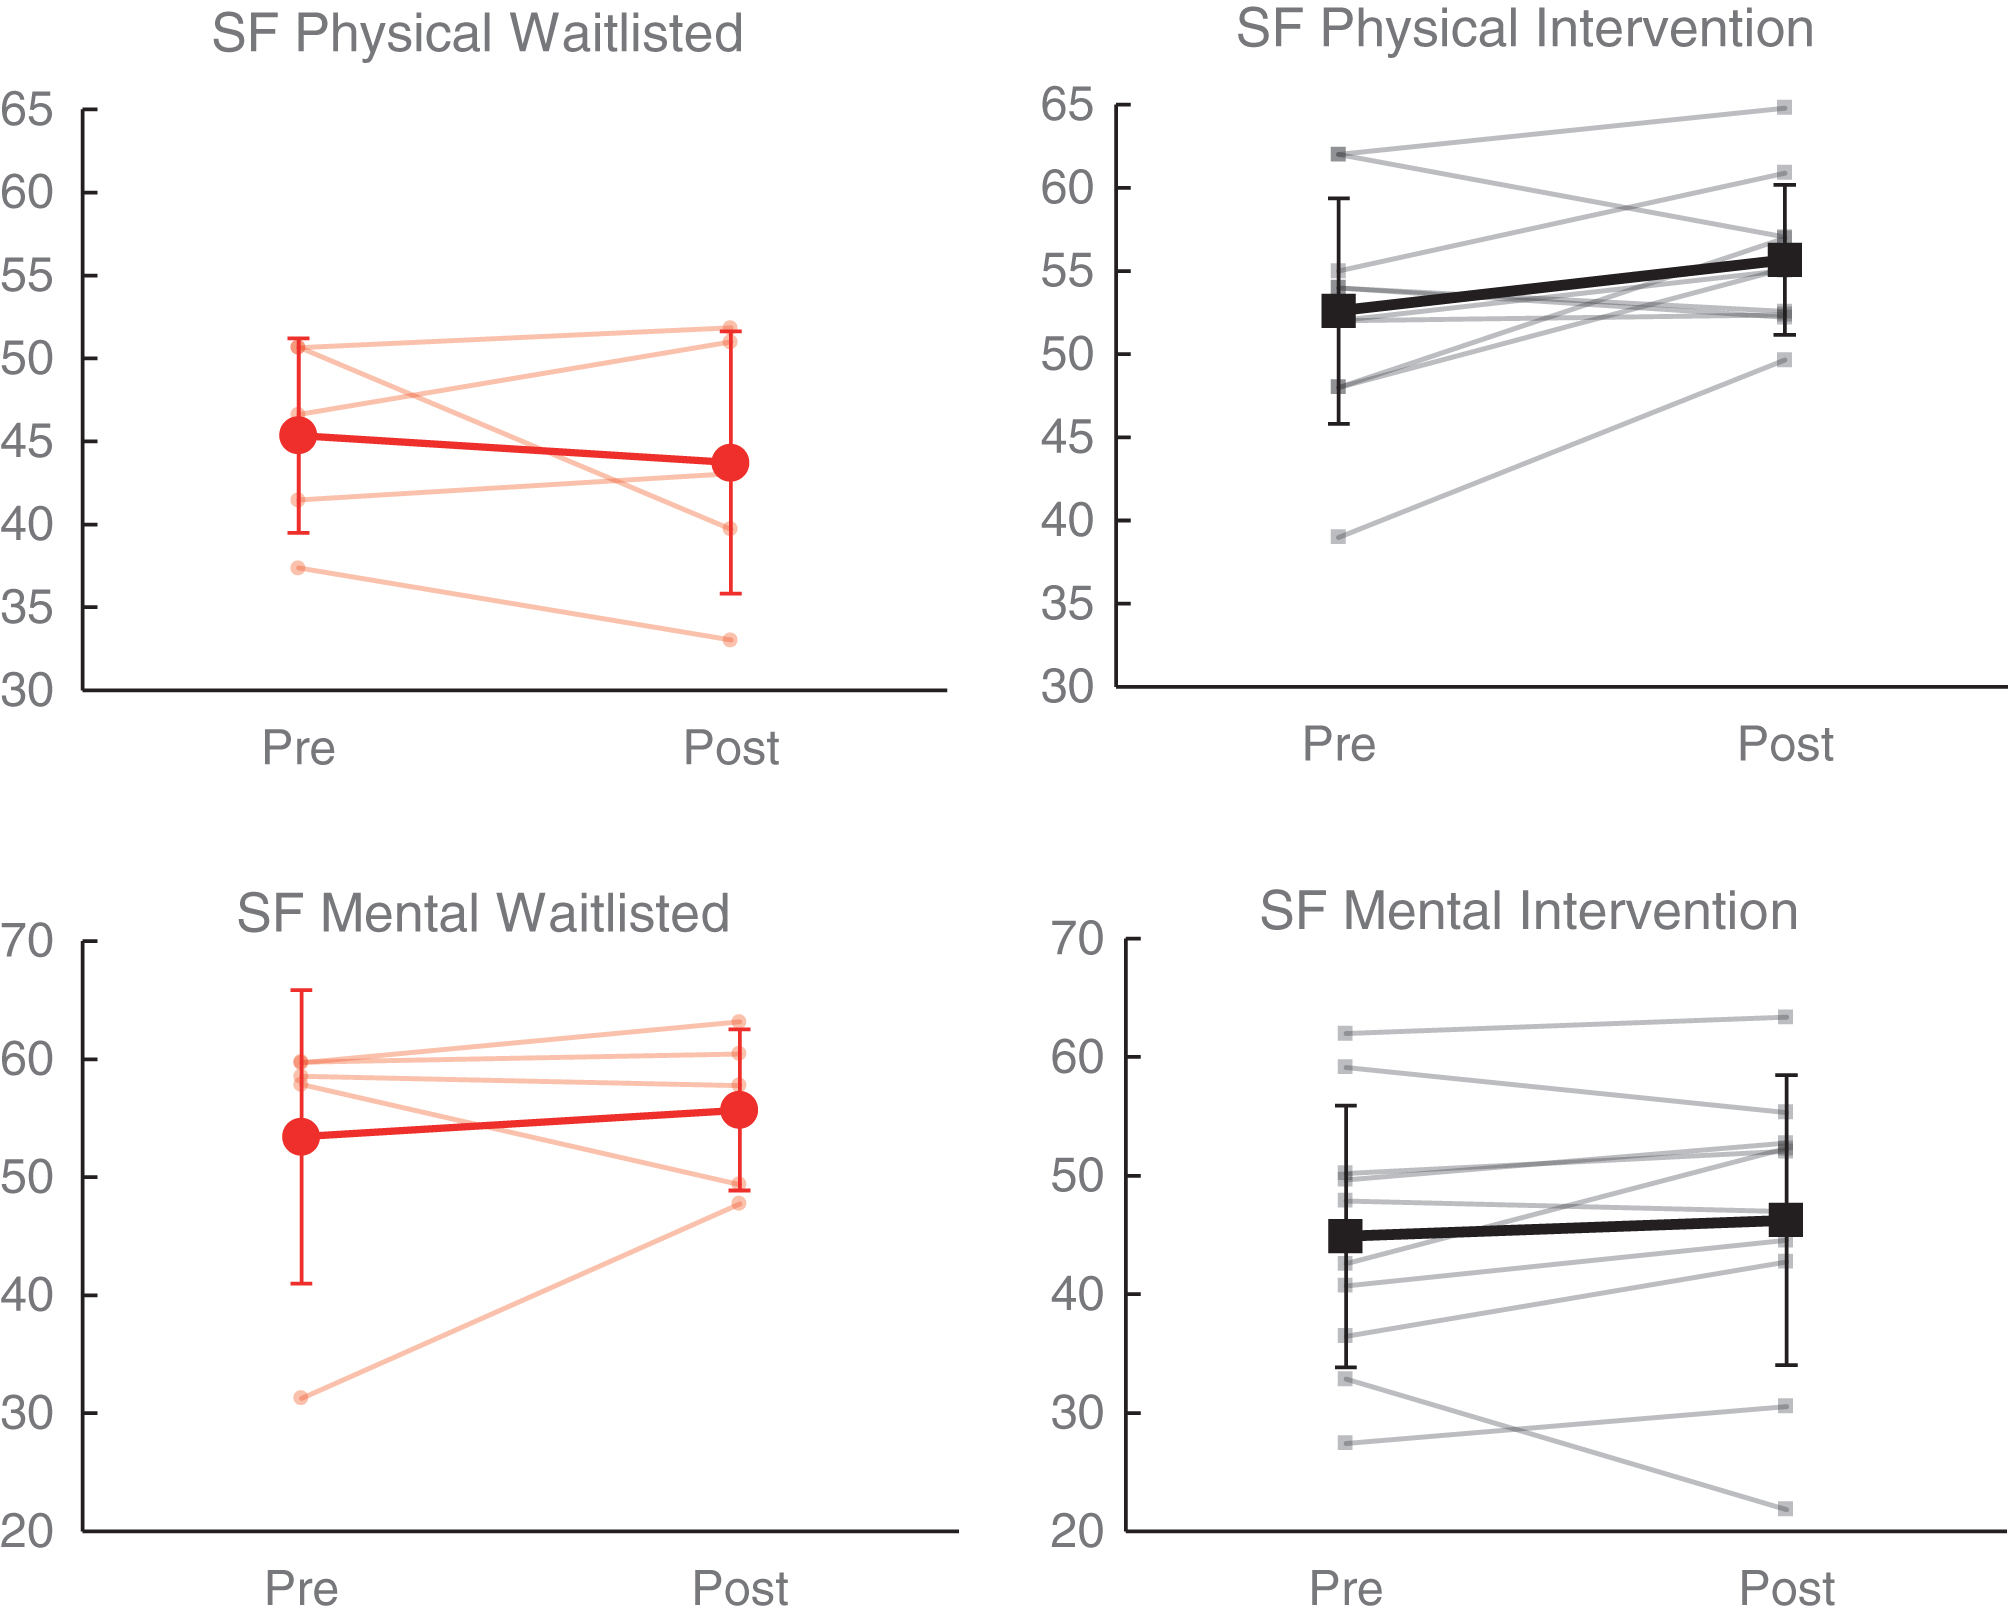 Effects of NeuroDRIVE intervention on health-related quality of life.